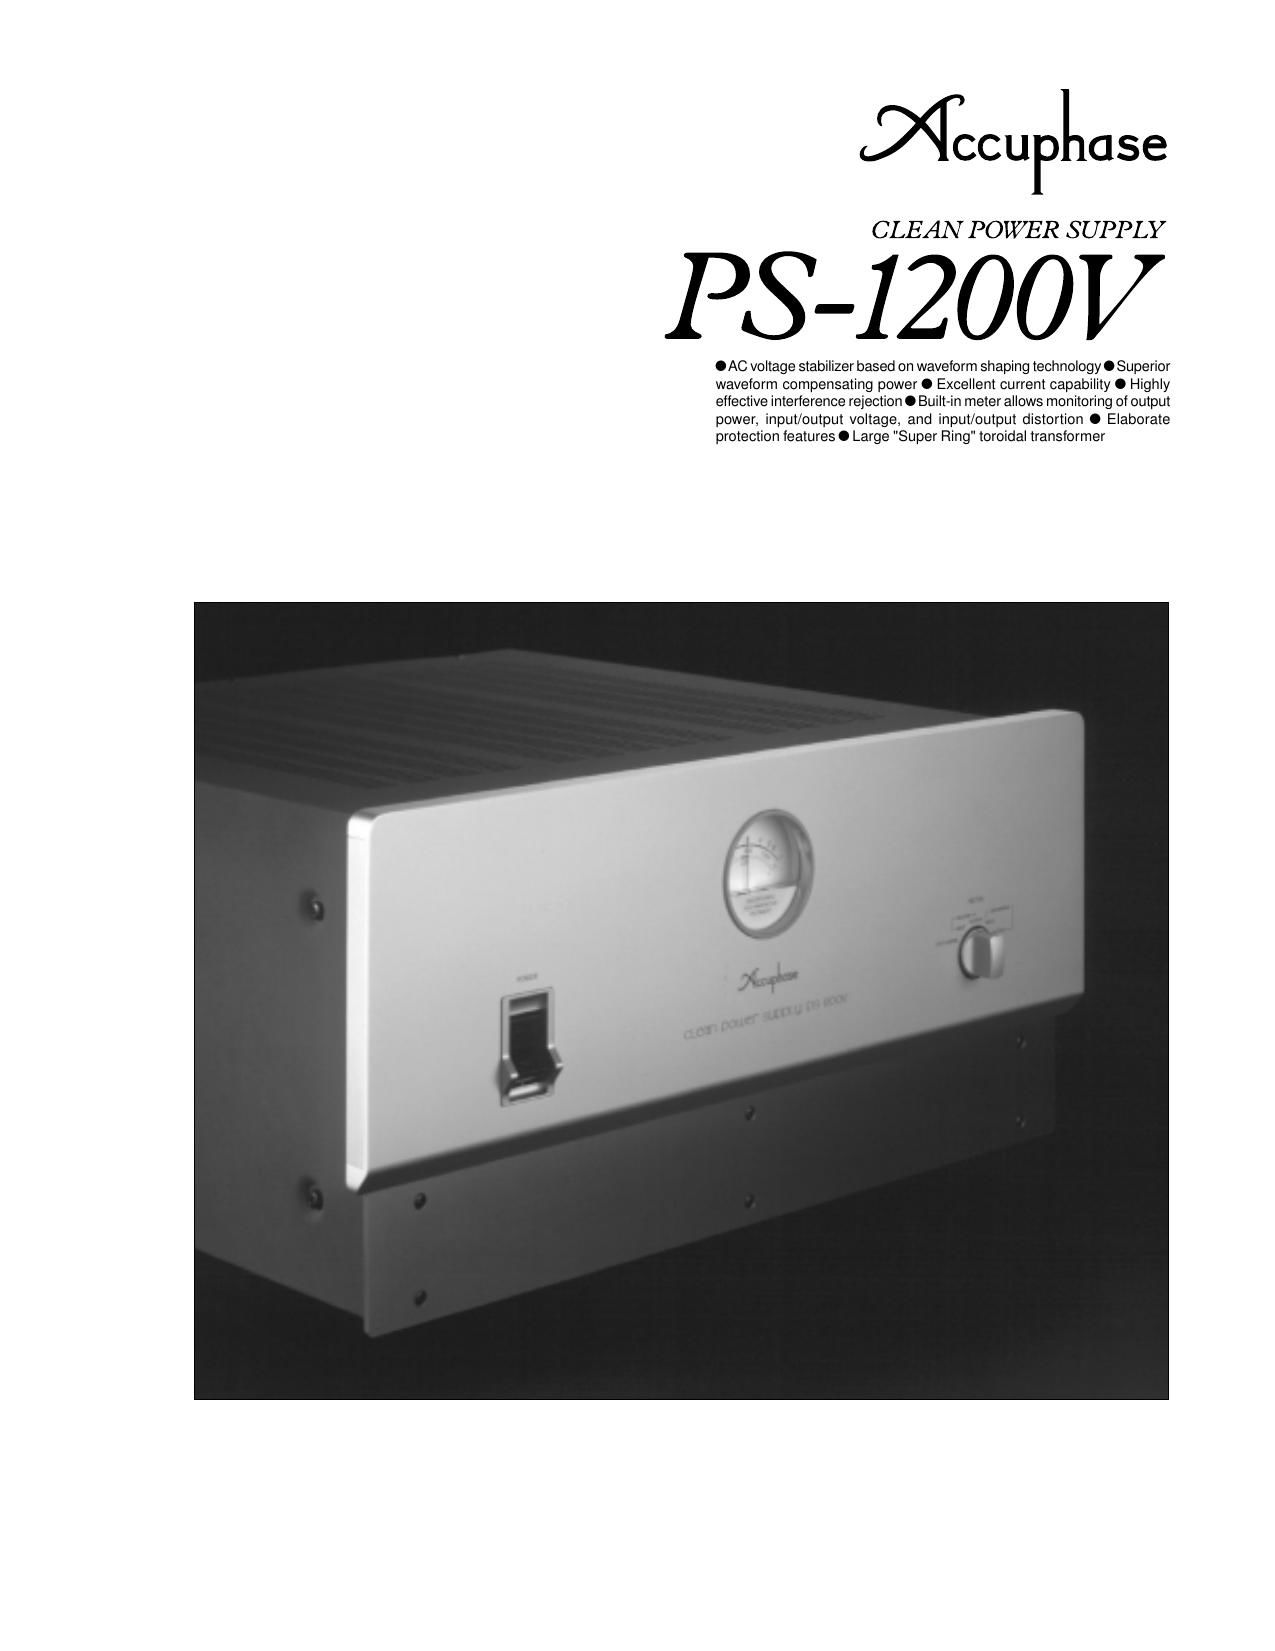 Accuphase PS 1200 V Brochure